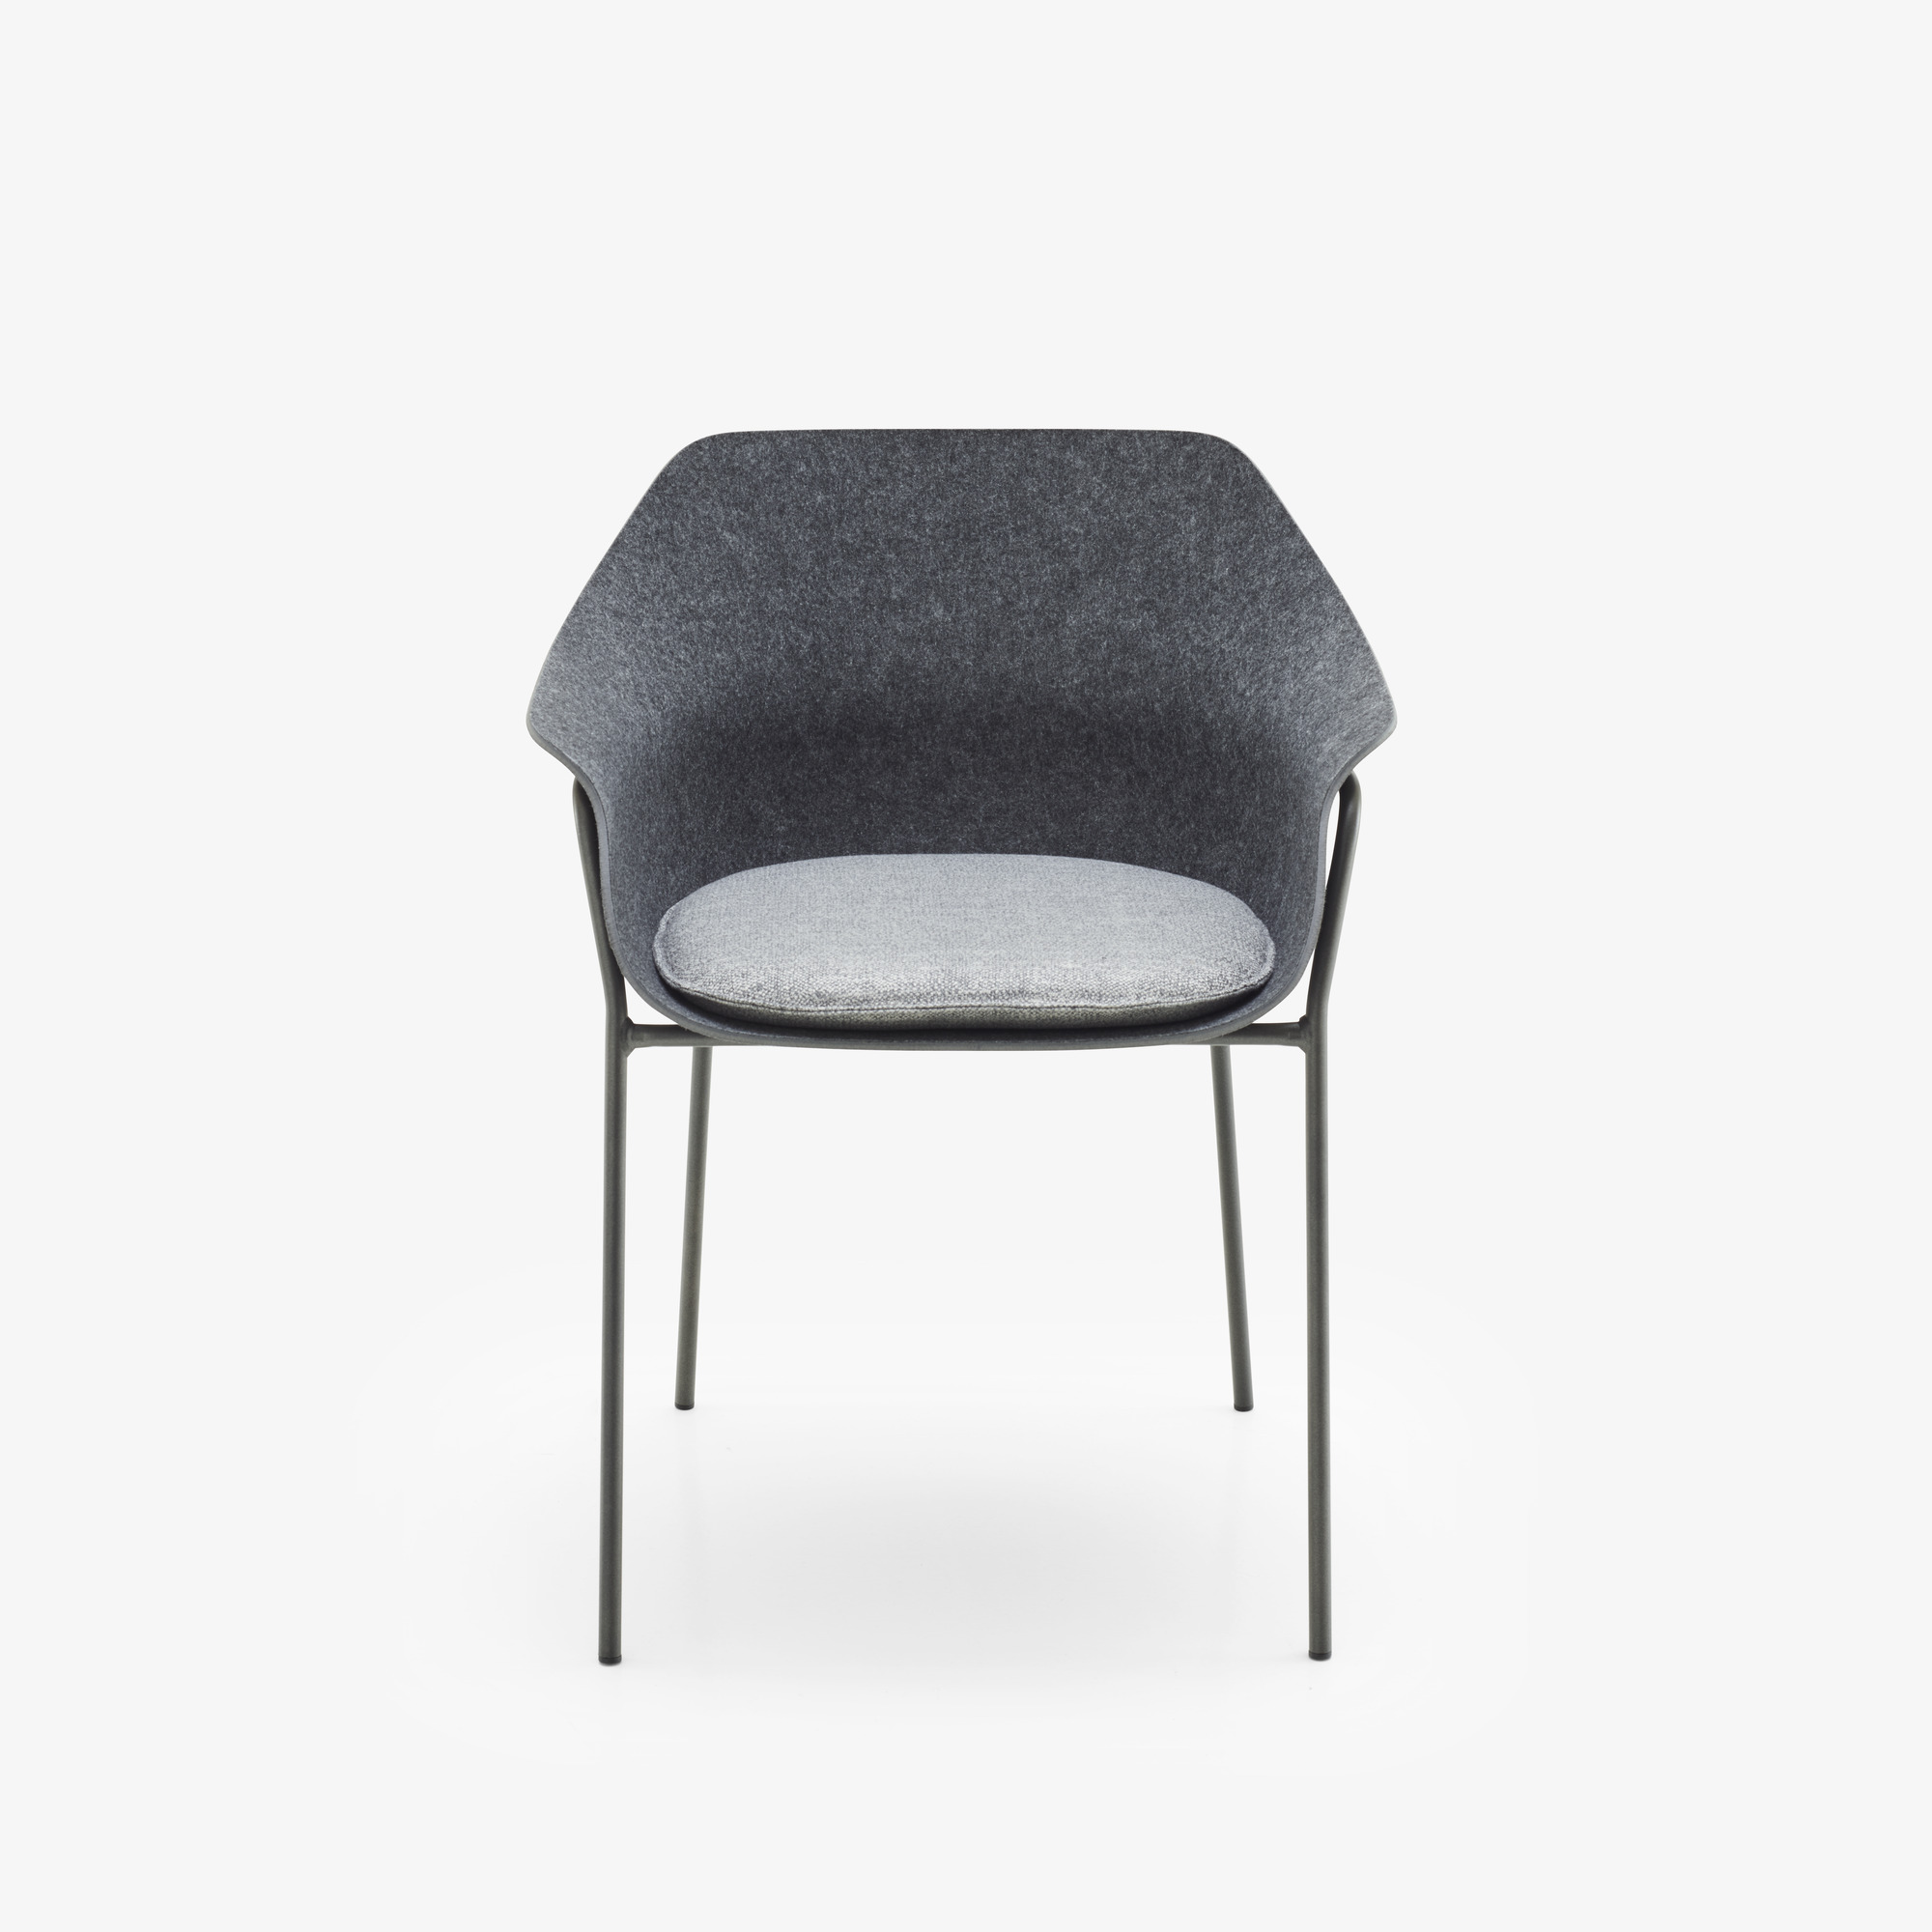 Image CHAIR WITH ARMS ANTHRACITE METAL BASE 